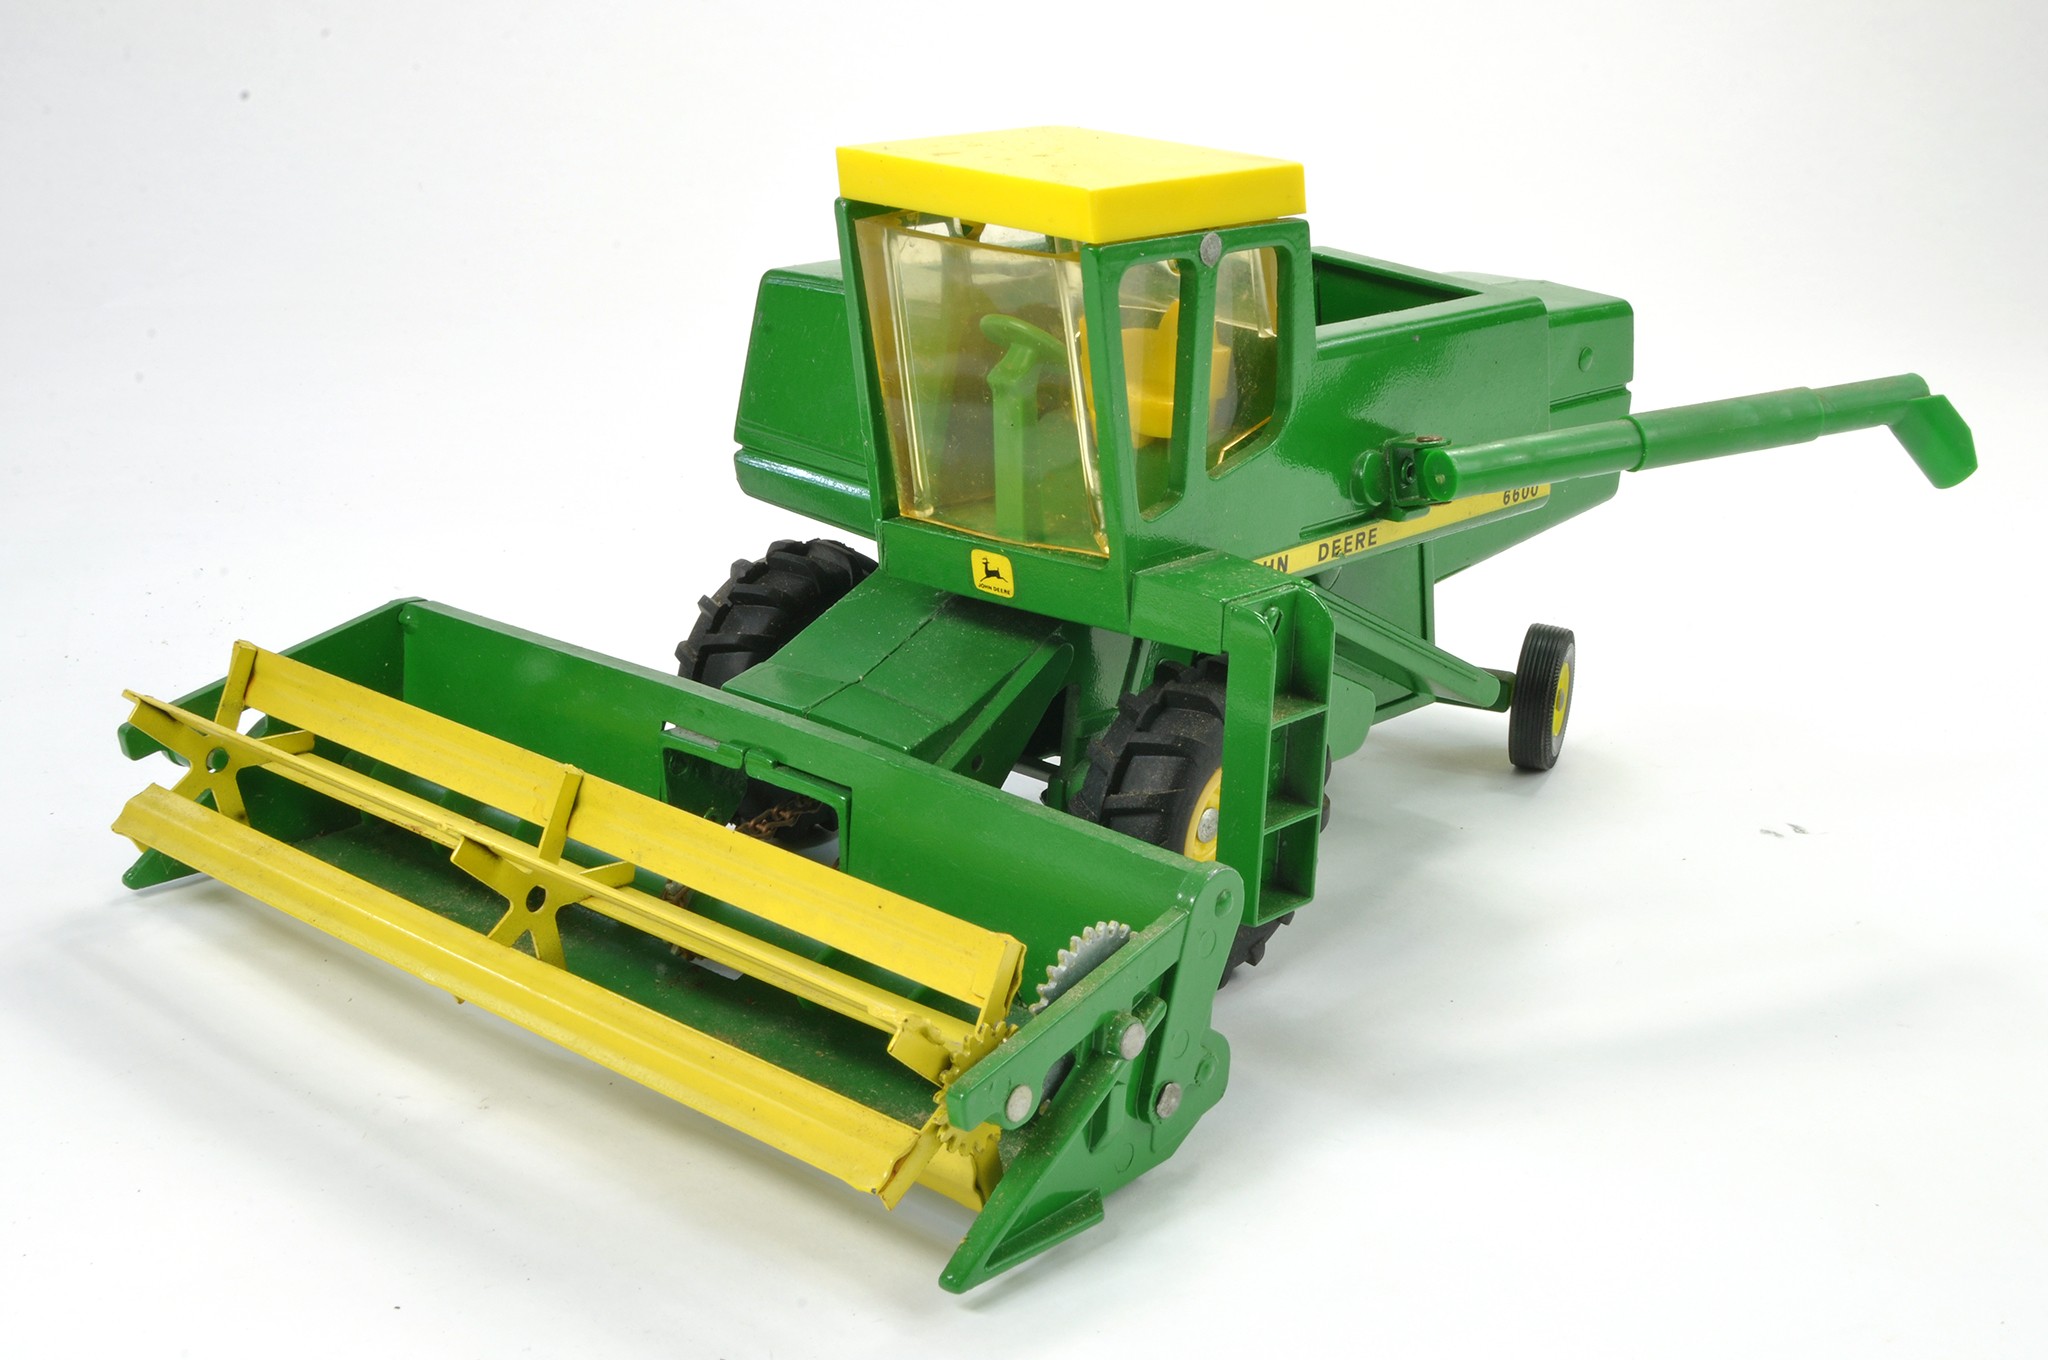 Ertl 1/24 Model Farm Issue comprising John Deere 6600 Mechanical Combine. Some Minor Marks and age